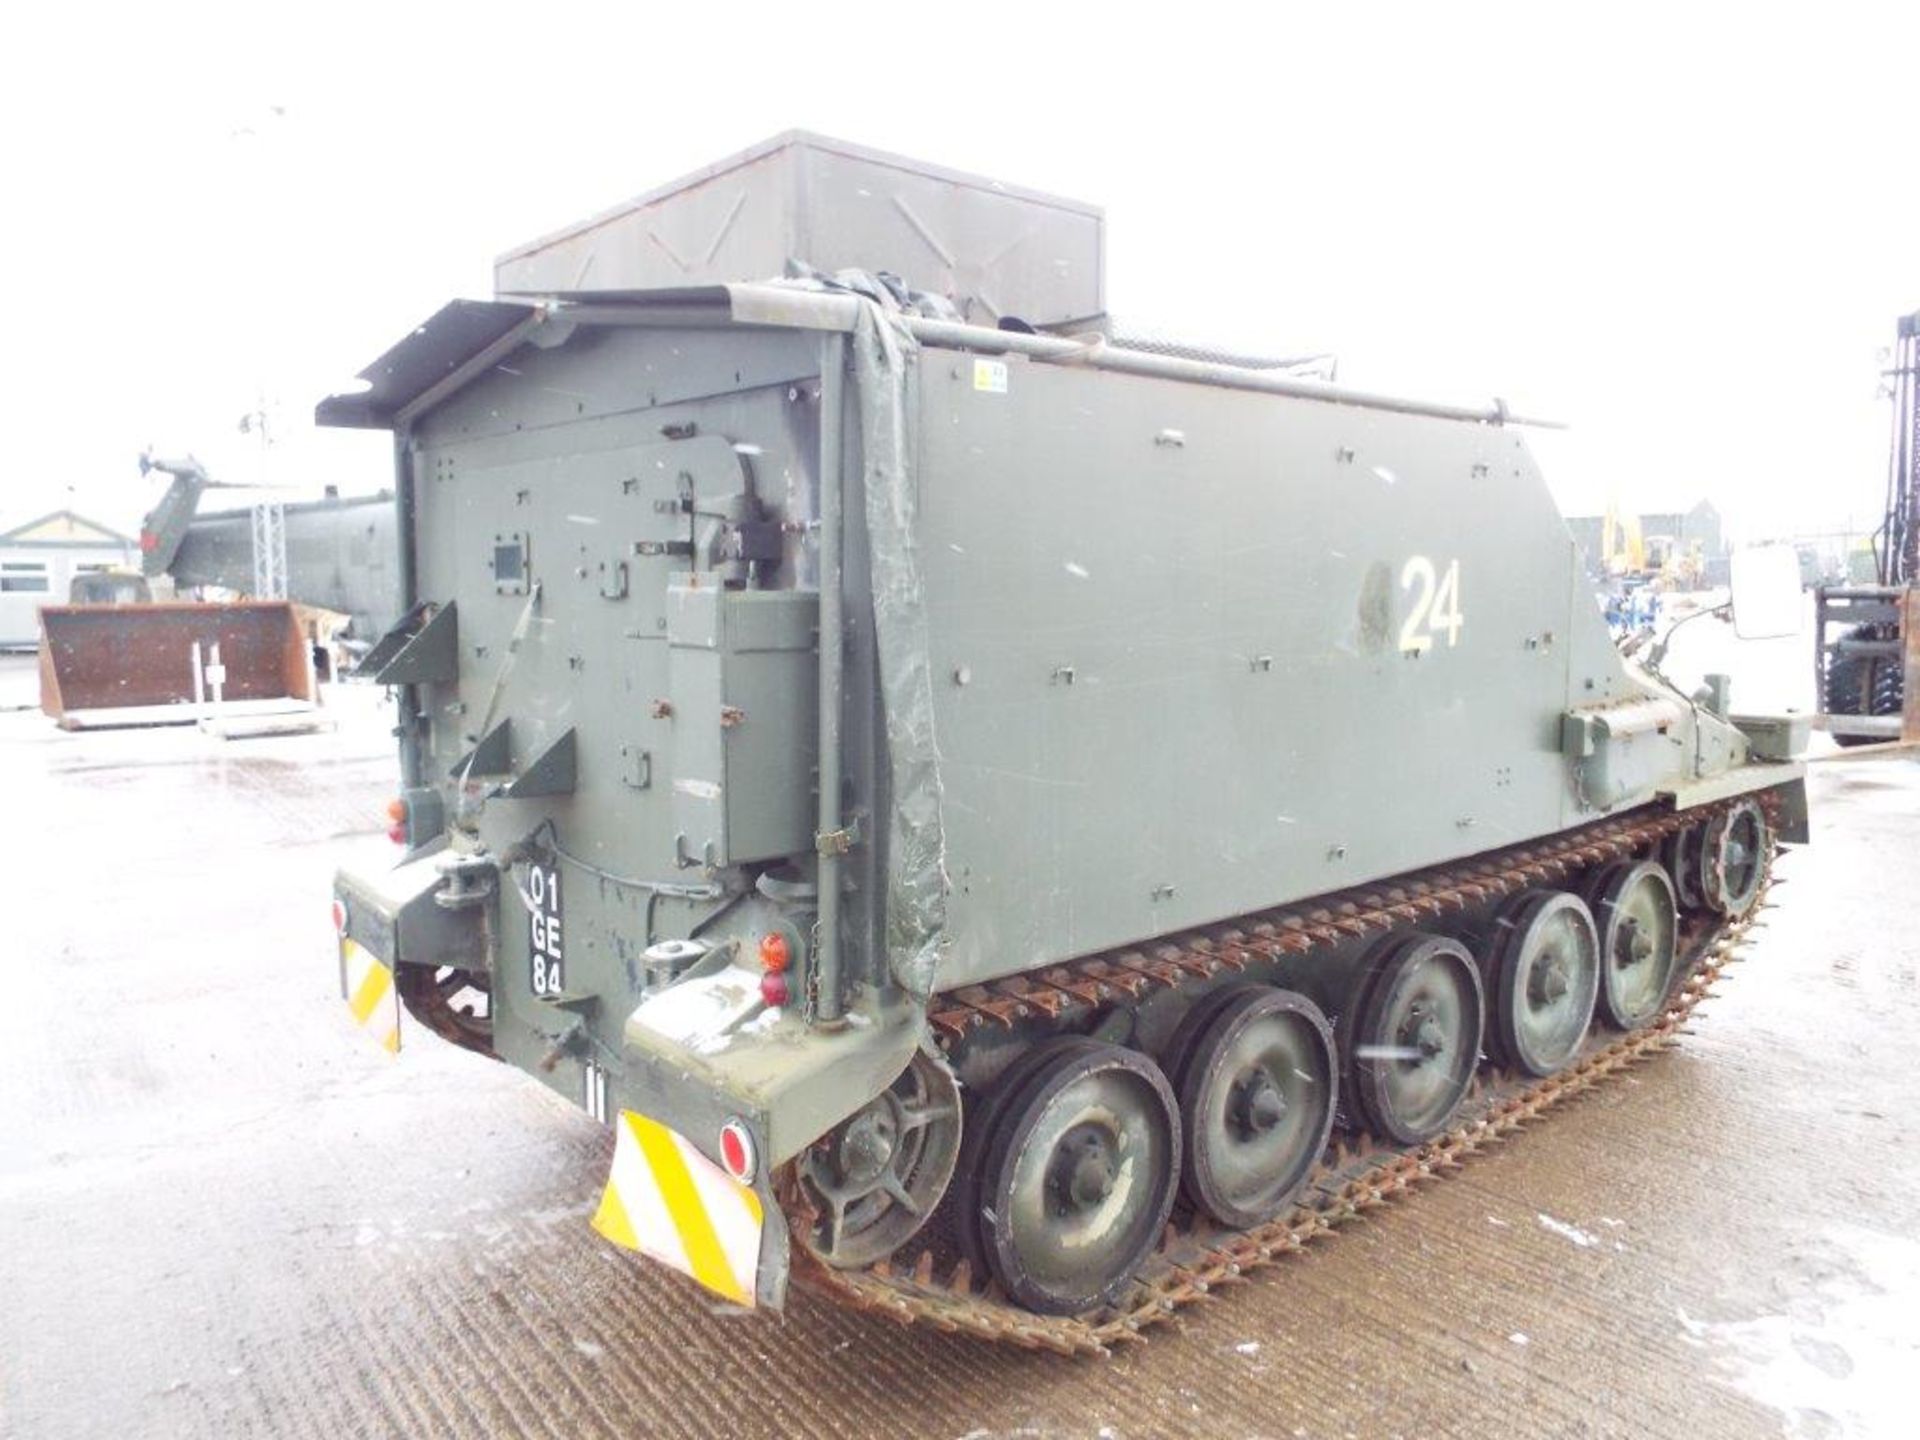 Dieselised CVRT FV105 Sultan Armoured Personnel Carrier with David Brown TN15e Gearbox - Image 7 of 26